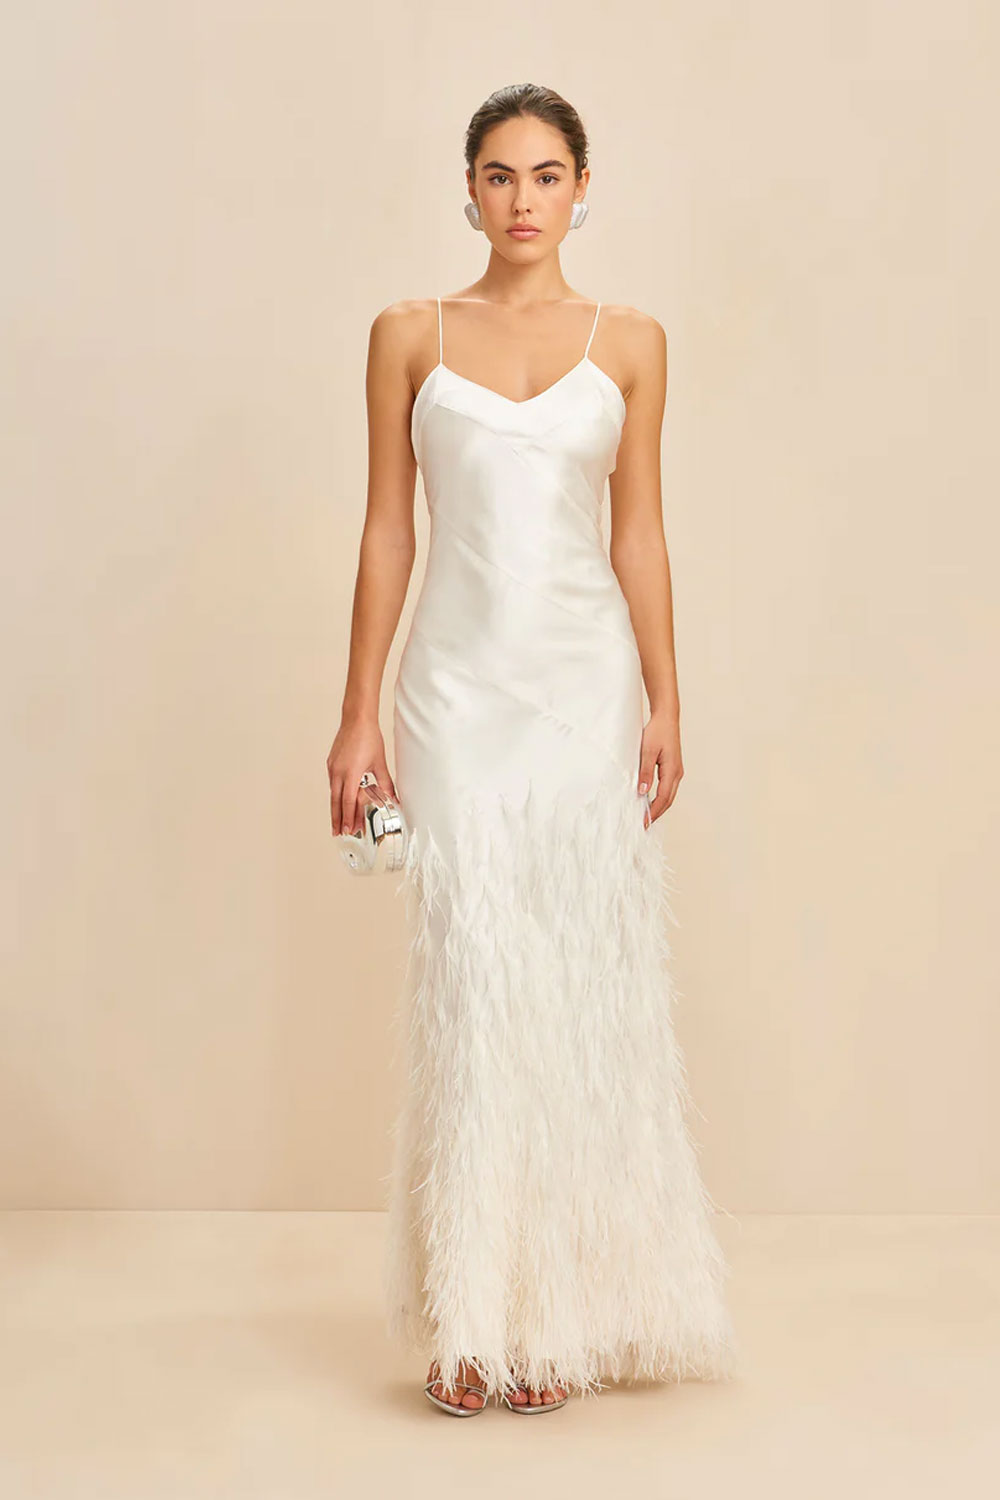 Hansal wedding gown from Cult Gaia (also available in a statement blue)